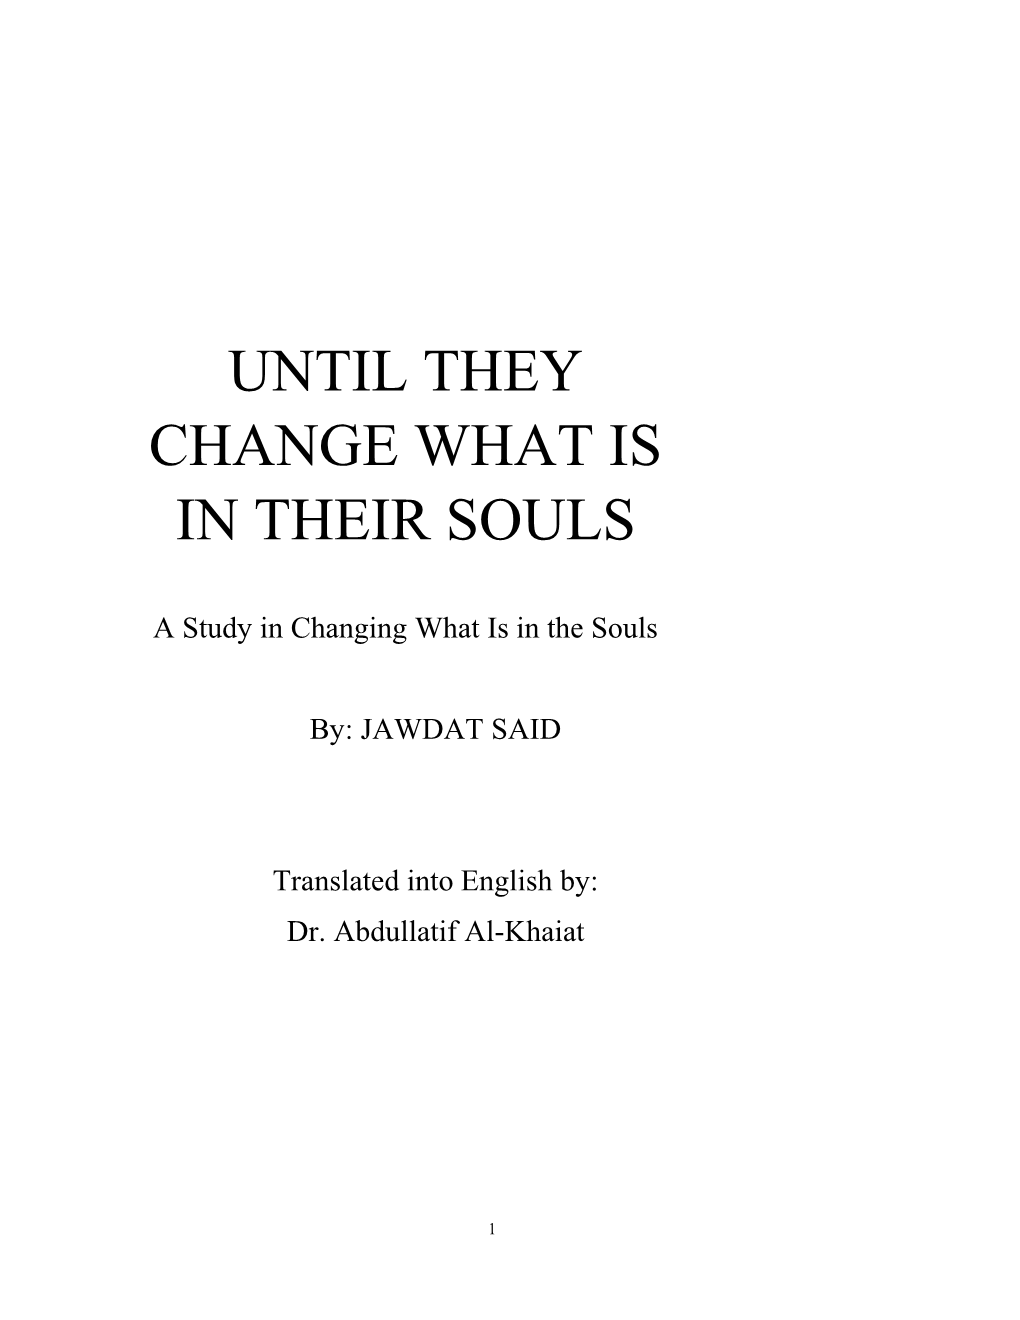 Until They Change What Is in Their Souls